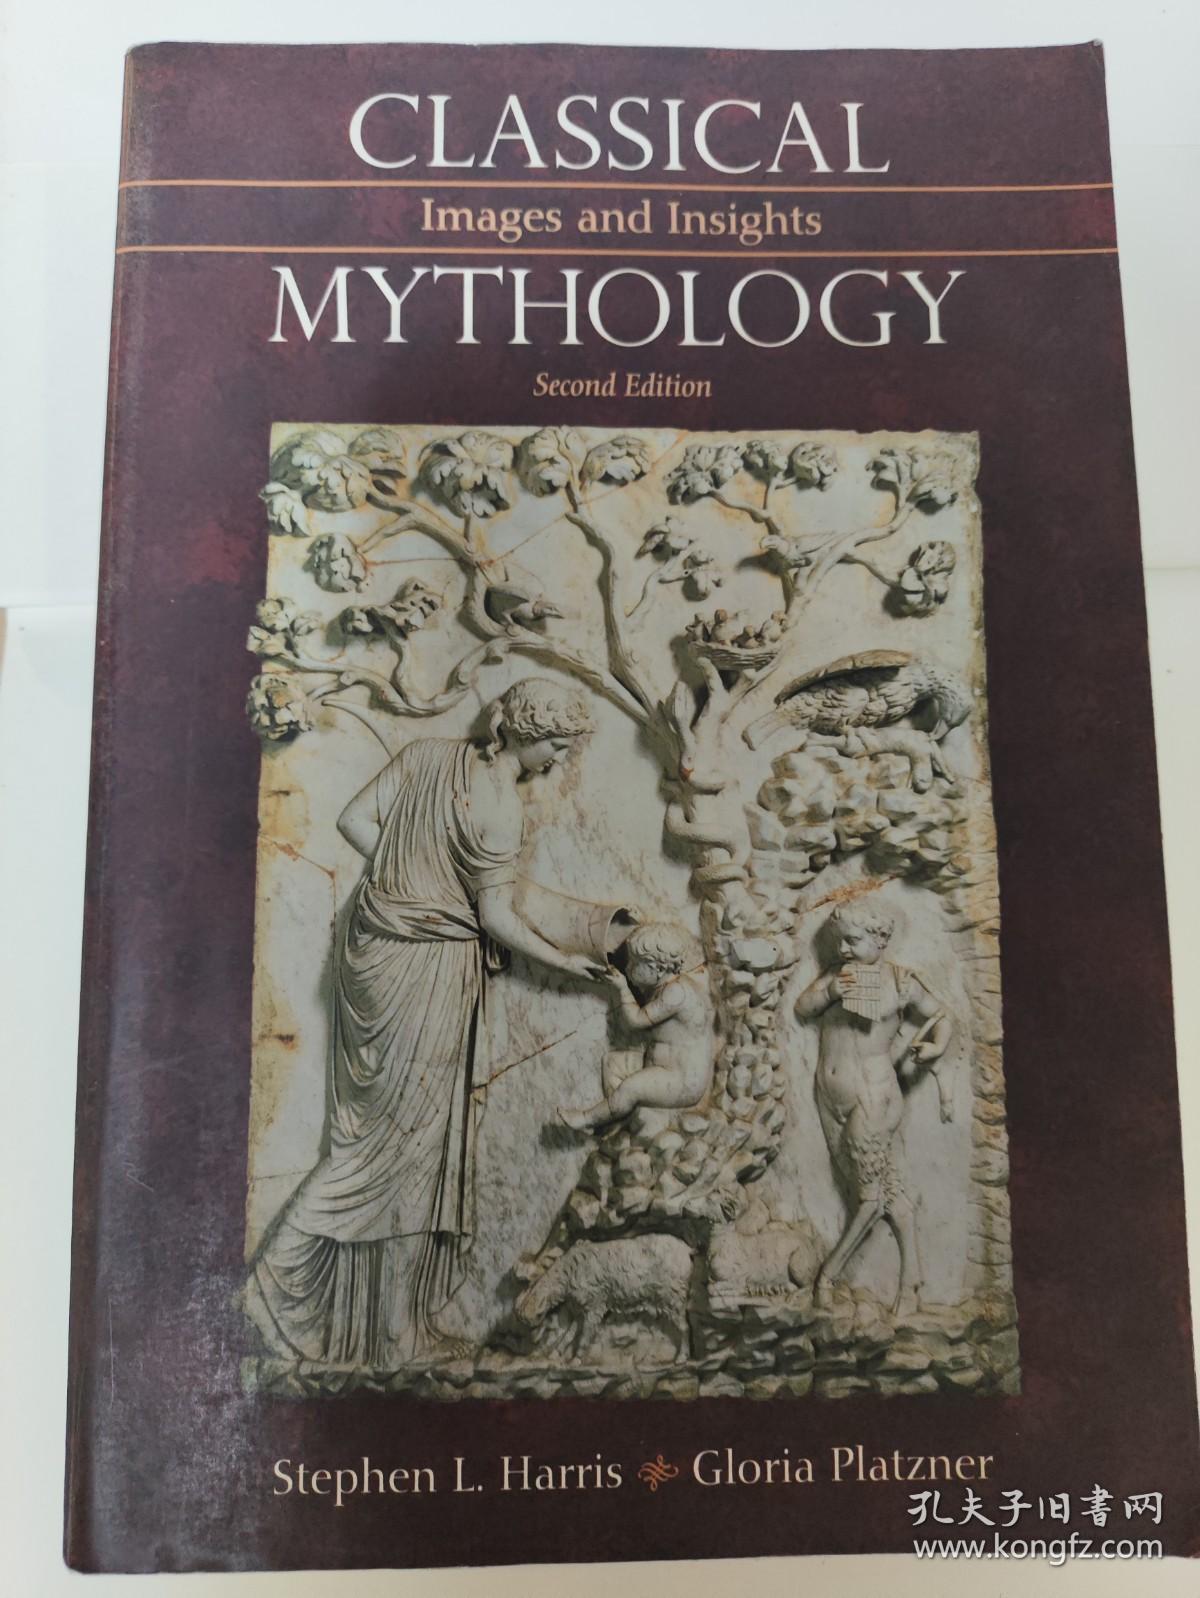 Classical Mythology: Images and Insights, Second Edition